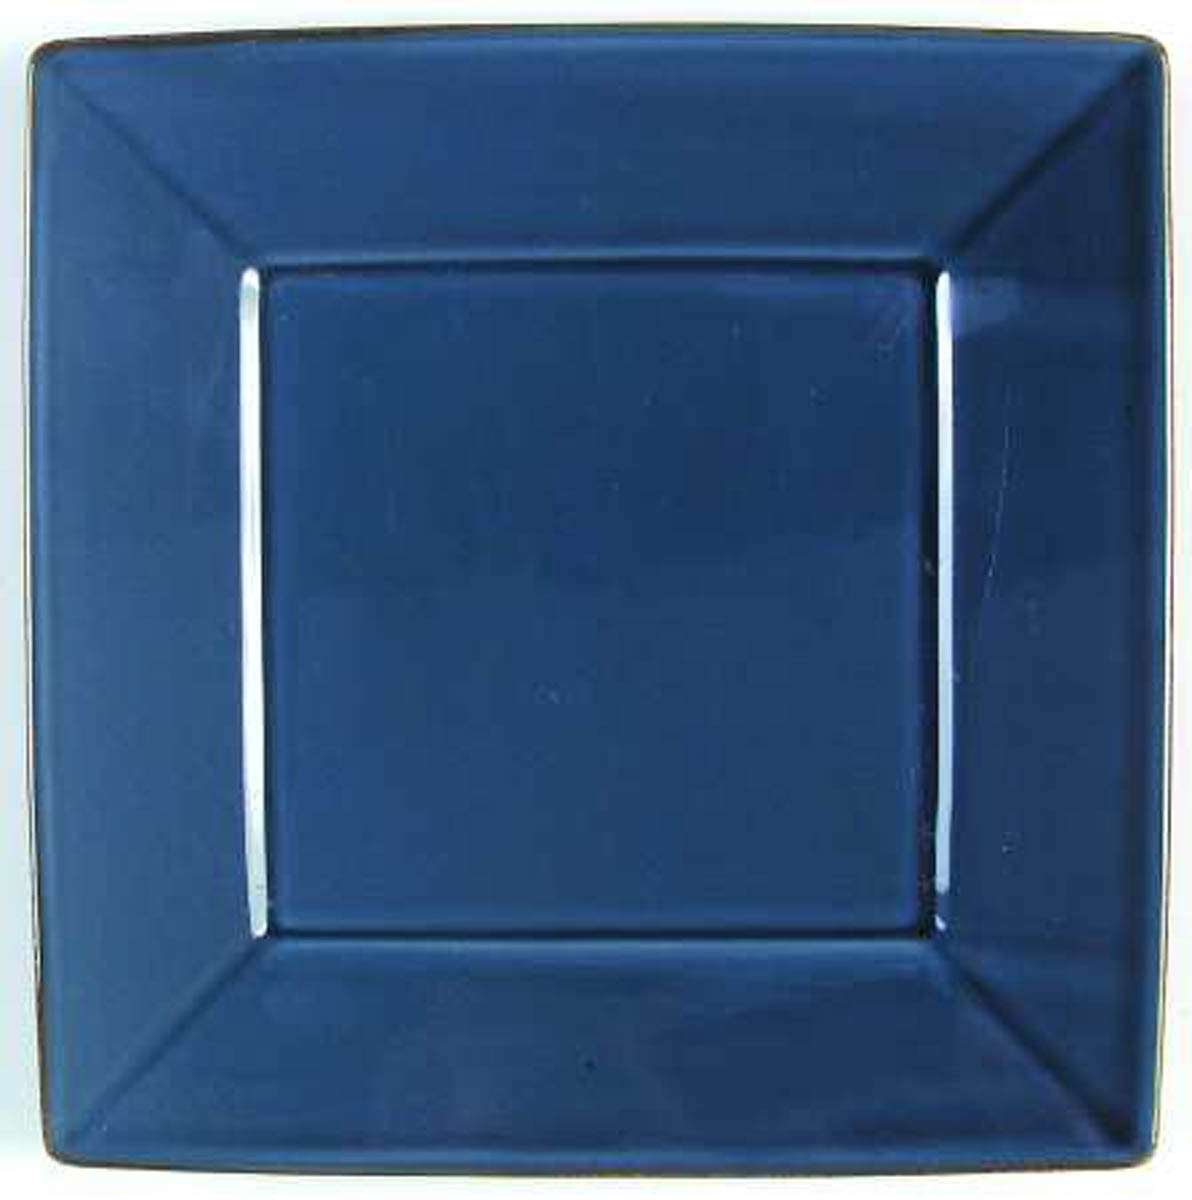 Our Lady of Weight Loss Square Blue Plate